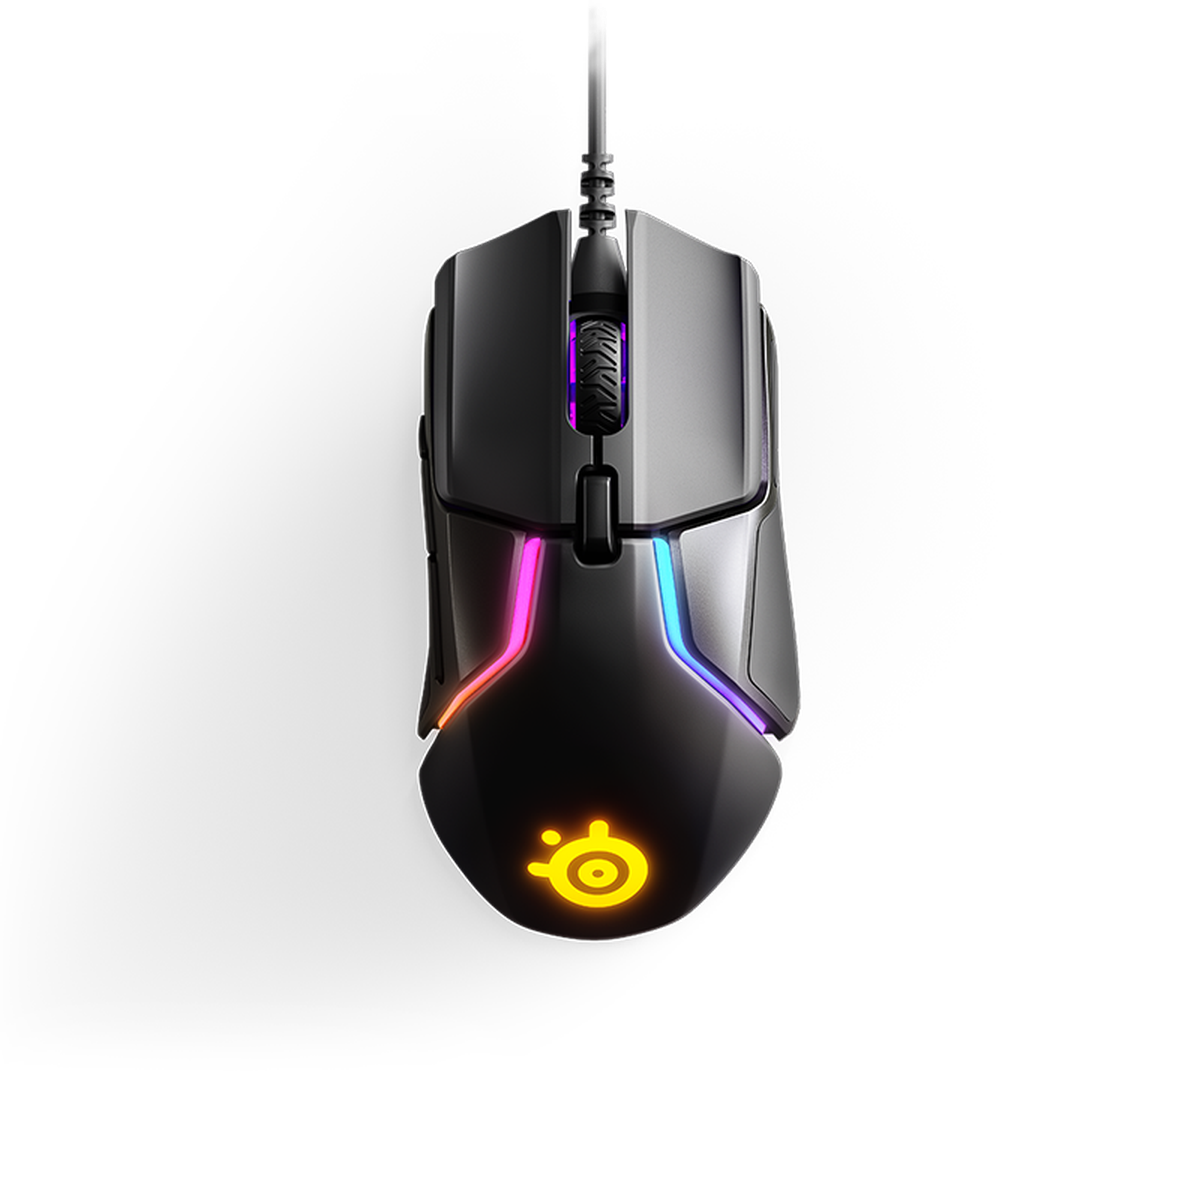 a product shot of the SteelSeries Rival 600 gaming mouse